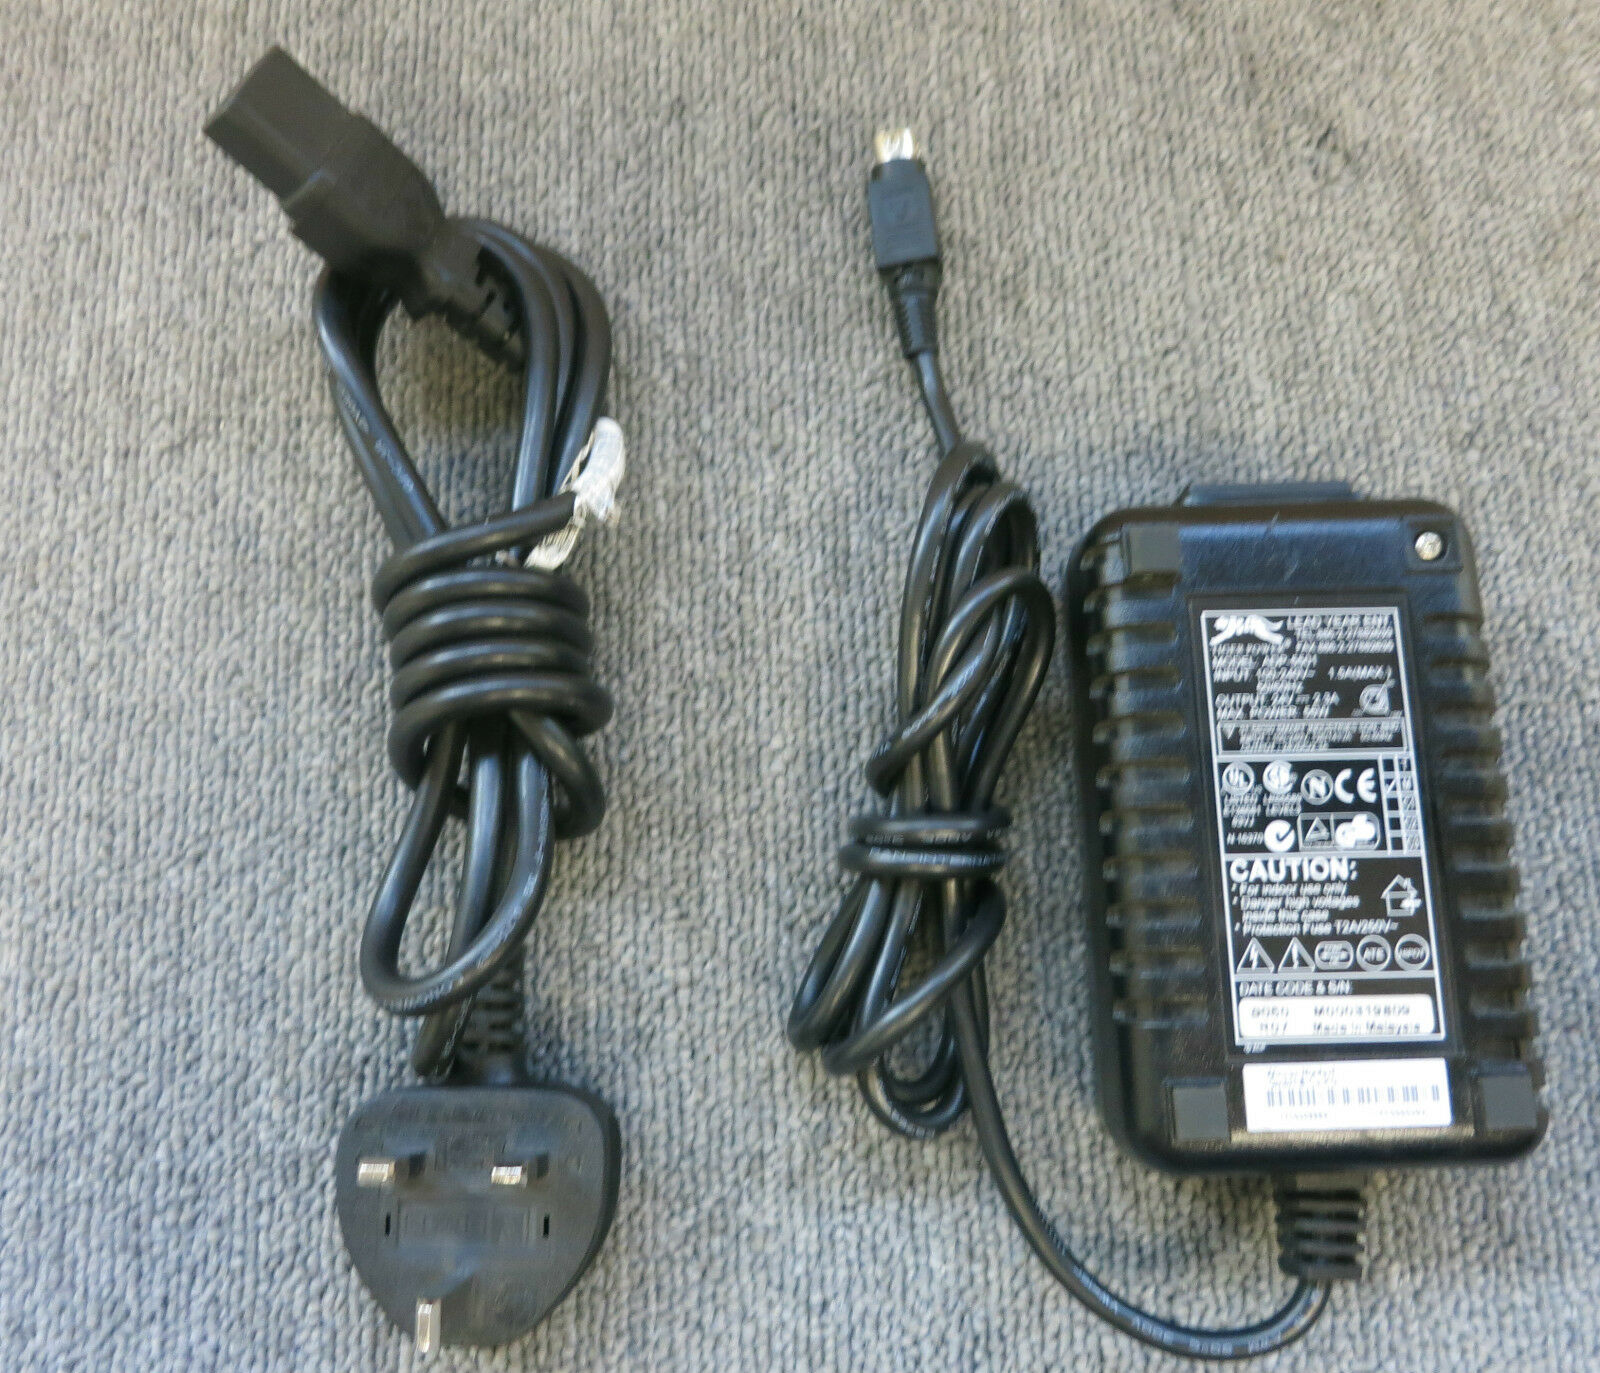 Tiger Power ADP-5501 3 Pin Receipt Printer AC Power Adapter 55W 24V 2.3A Type: AC Power Adapter MPN: ADP-5501 Outpu